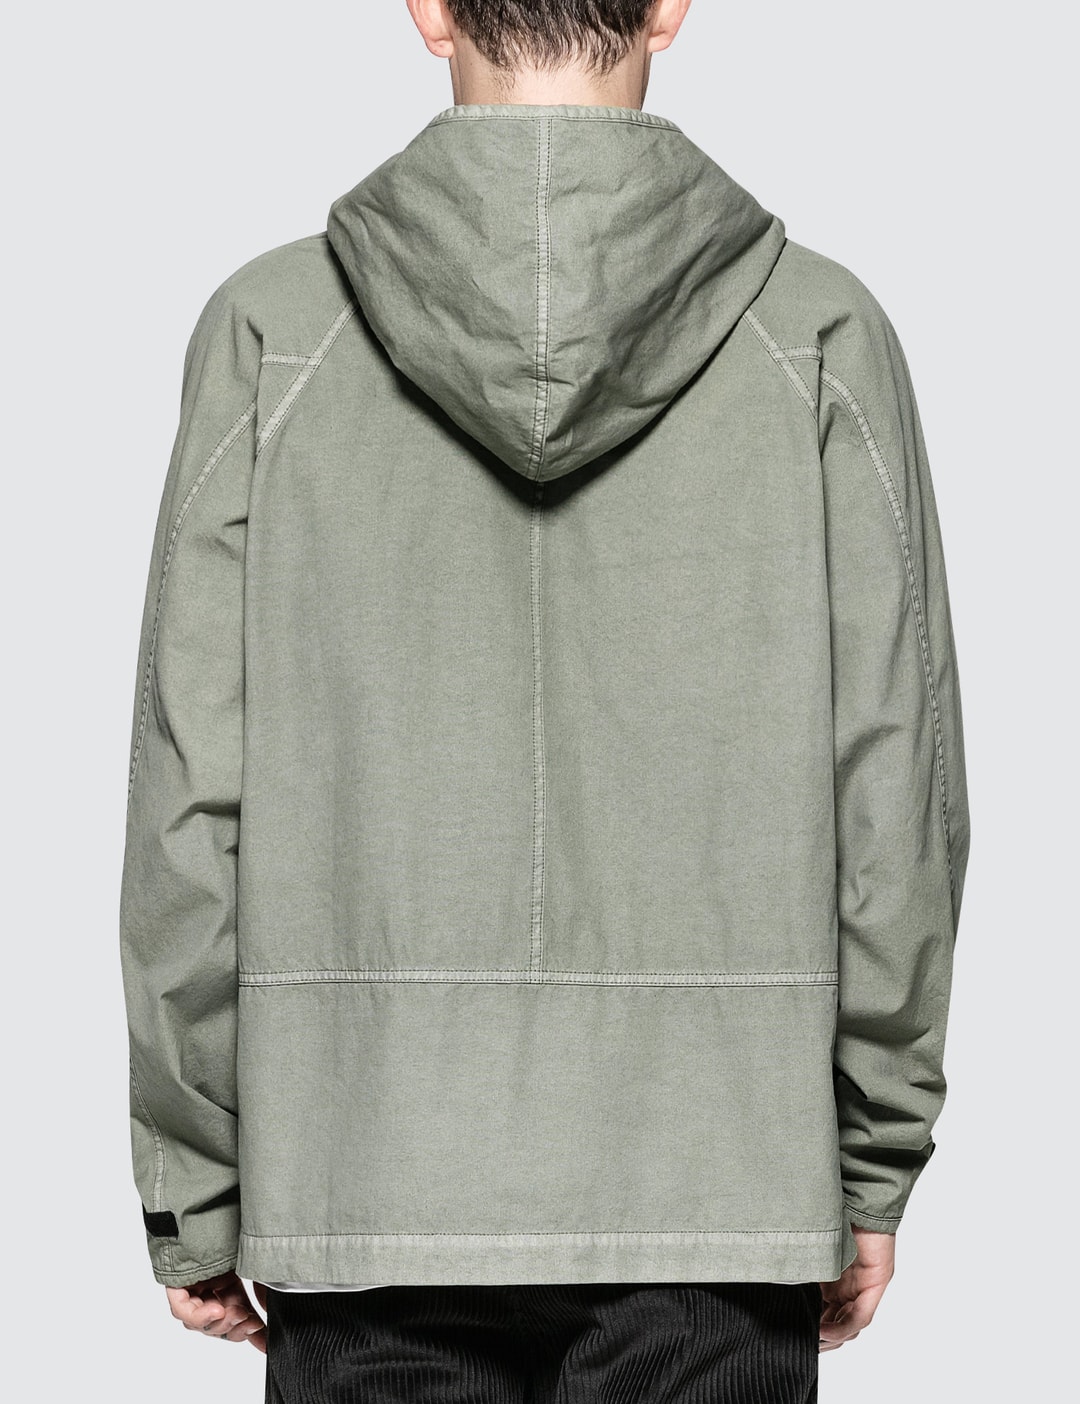 Très Bien - Hooded Blouson Jacket | HBX - Globally Curated Fashion and ...